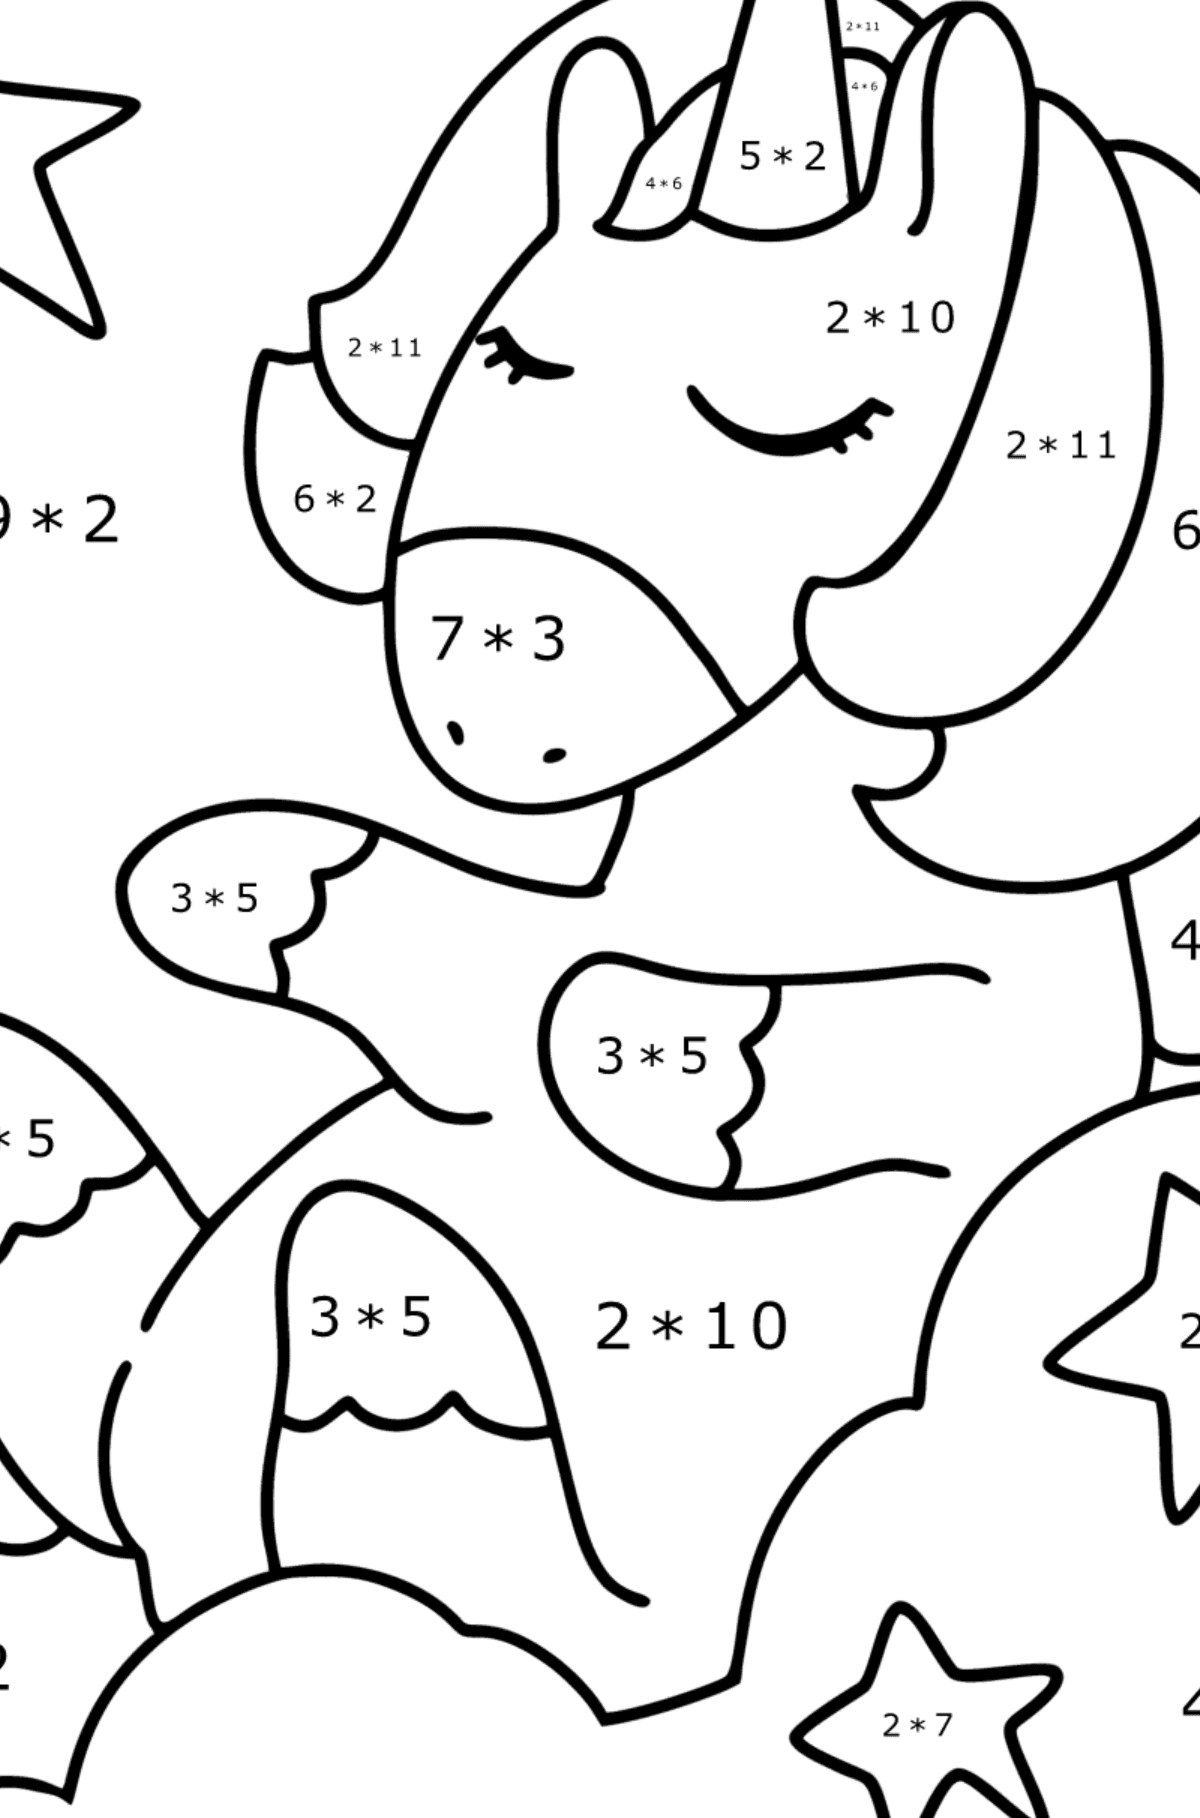 Funny unicorn coloring page - Math Coloring - Multiplication for Kids